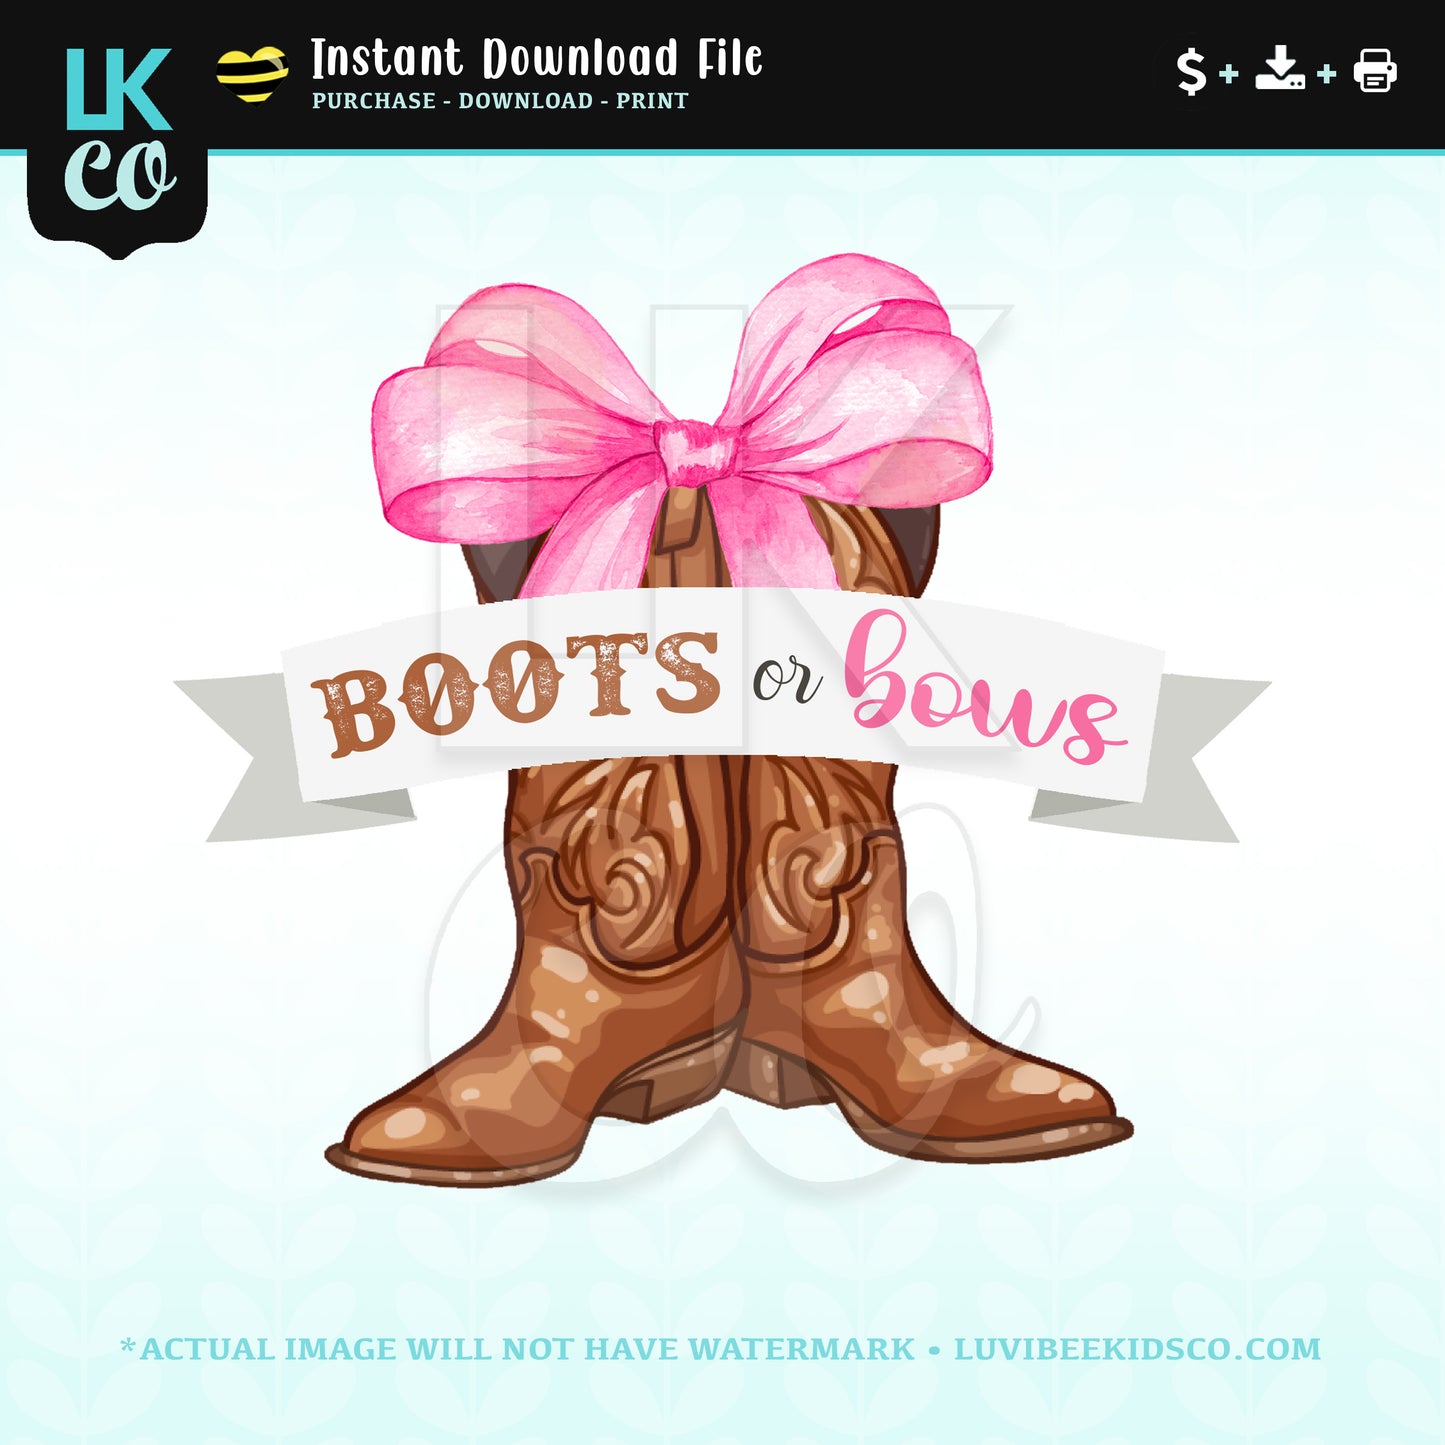 Boots or Bows Baby Shower Gender Reveal Theme - Instant Download